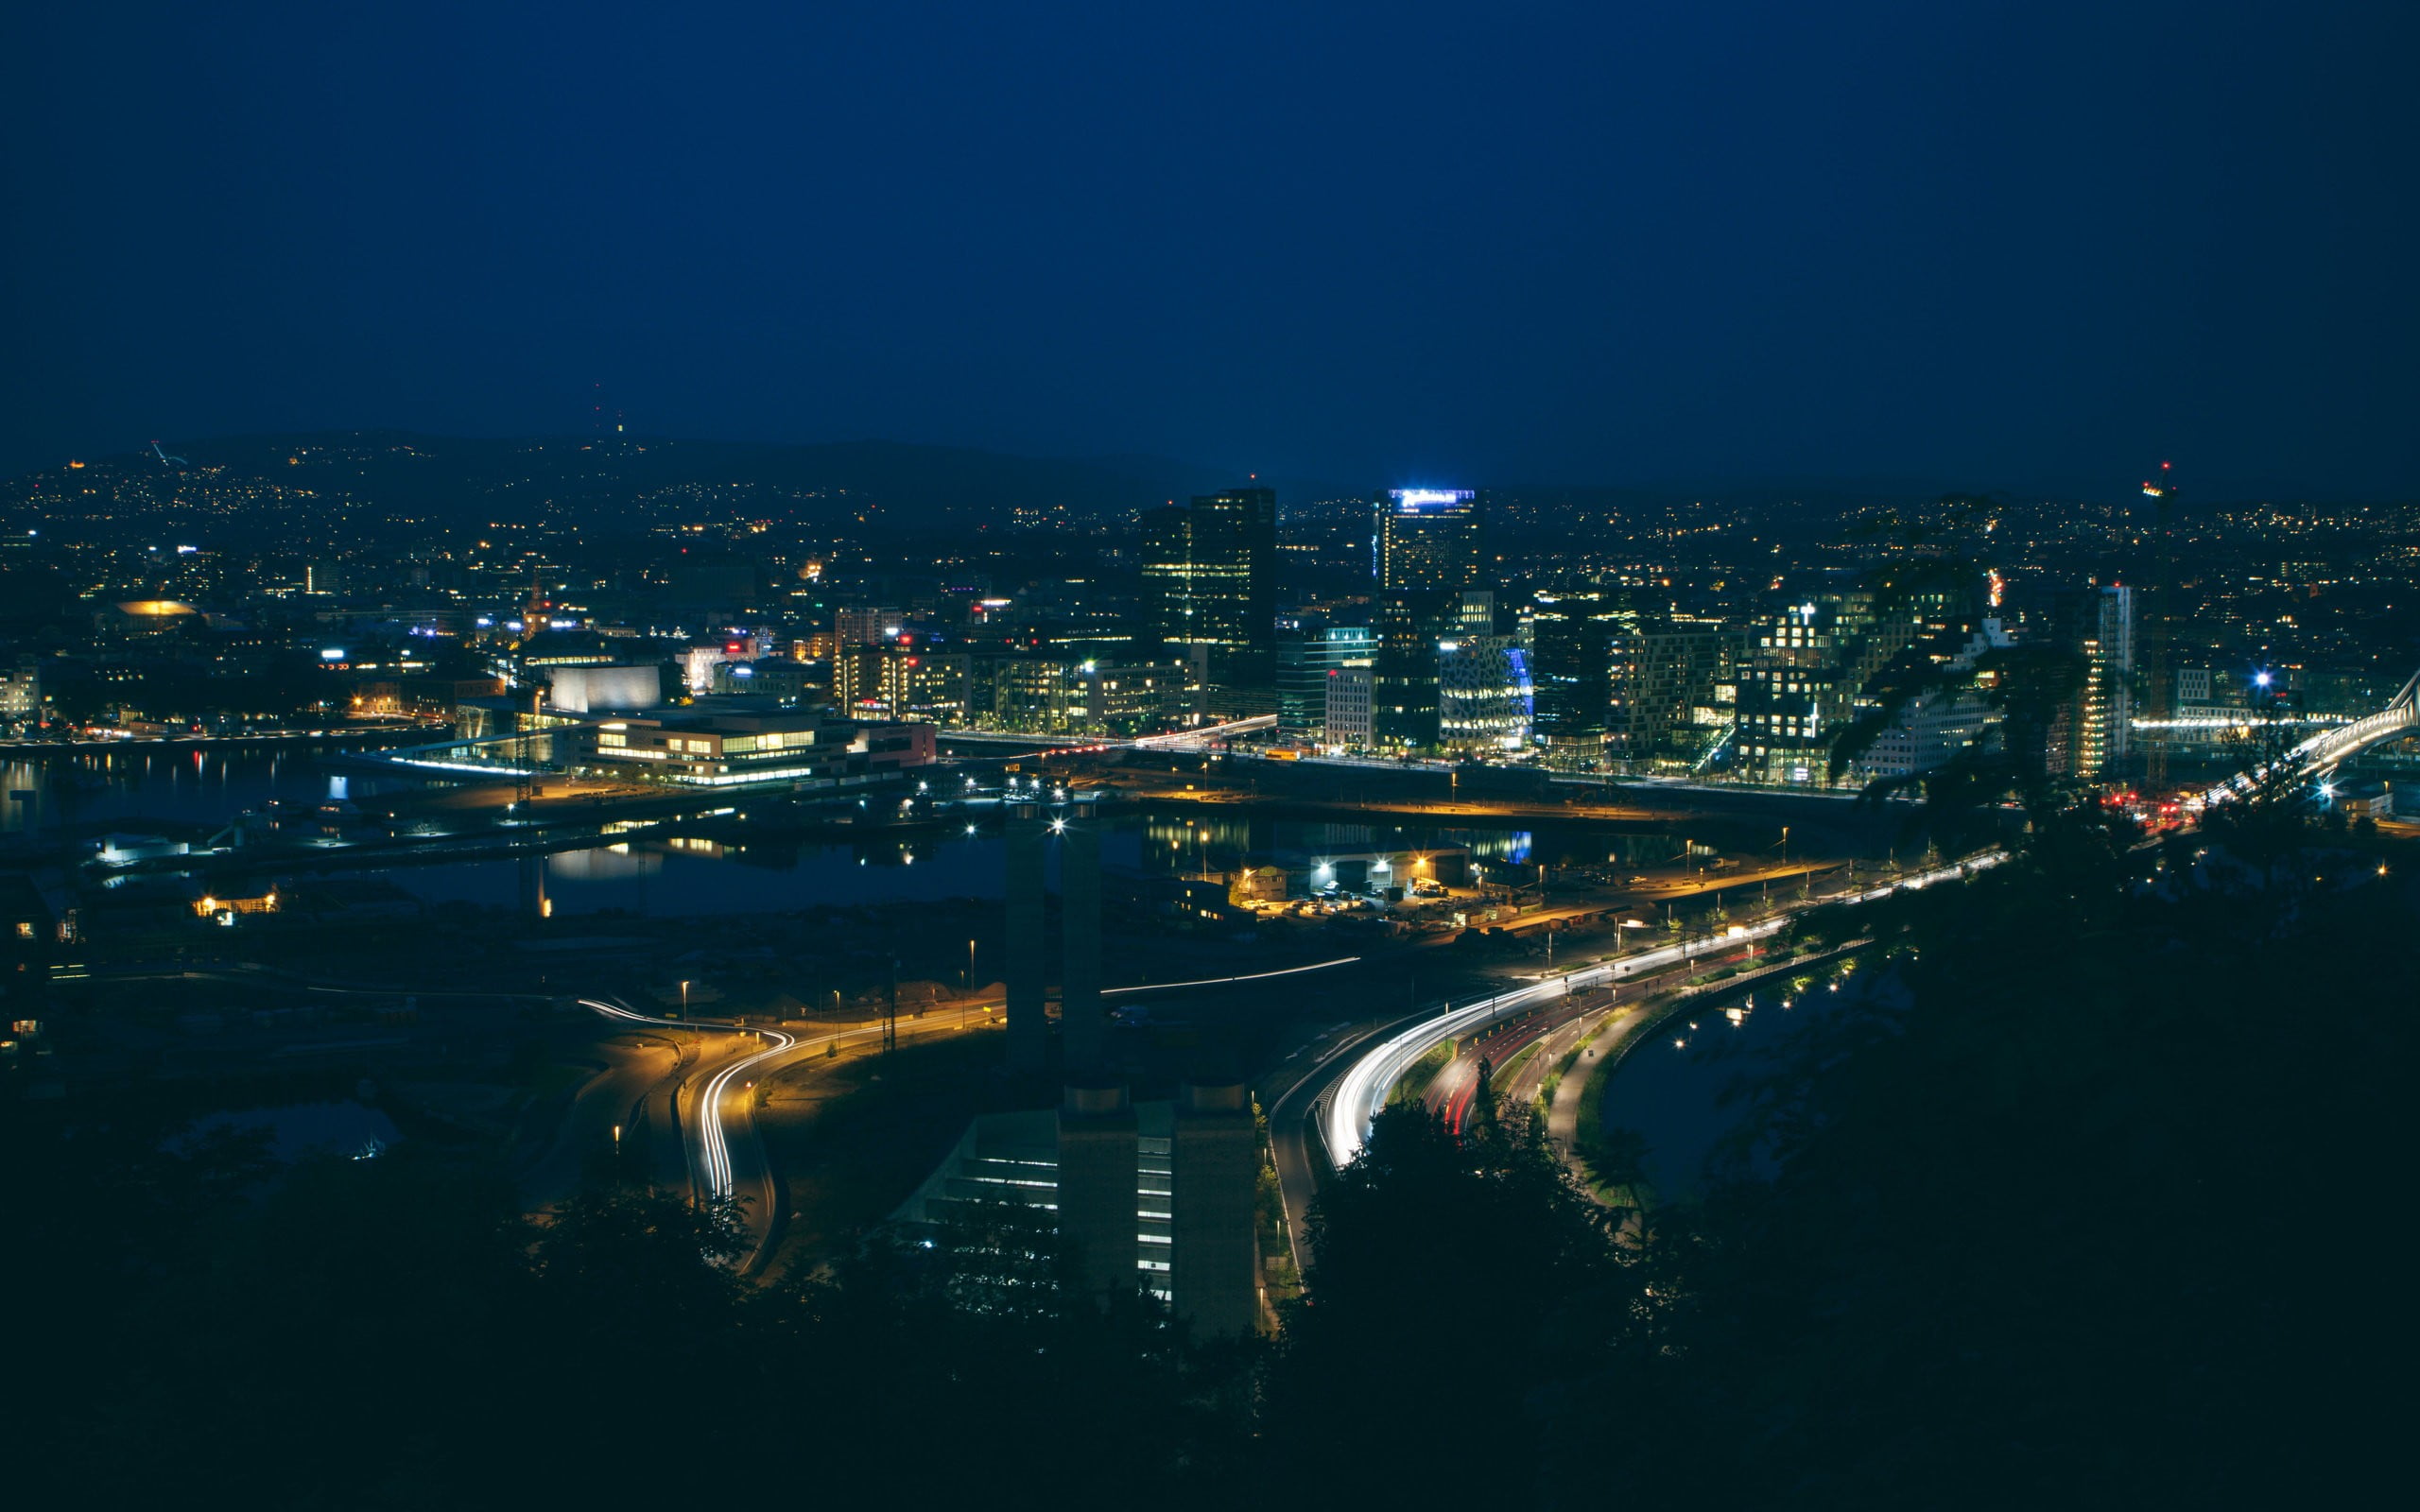 time lapse photograph of cityscape under night sky, Oslo, Norway, barcode, cityscape